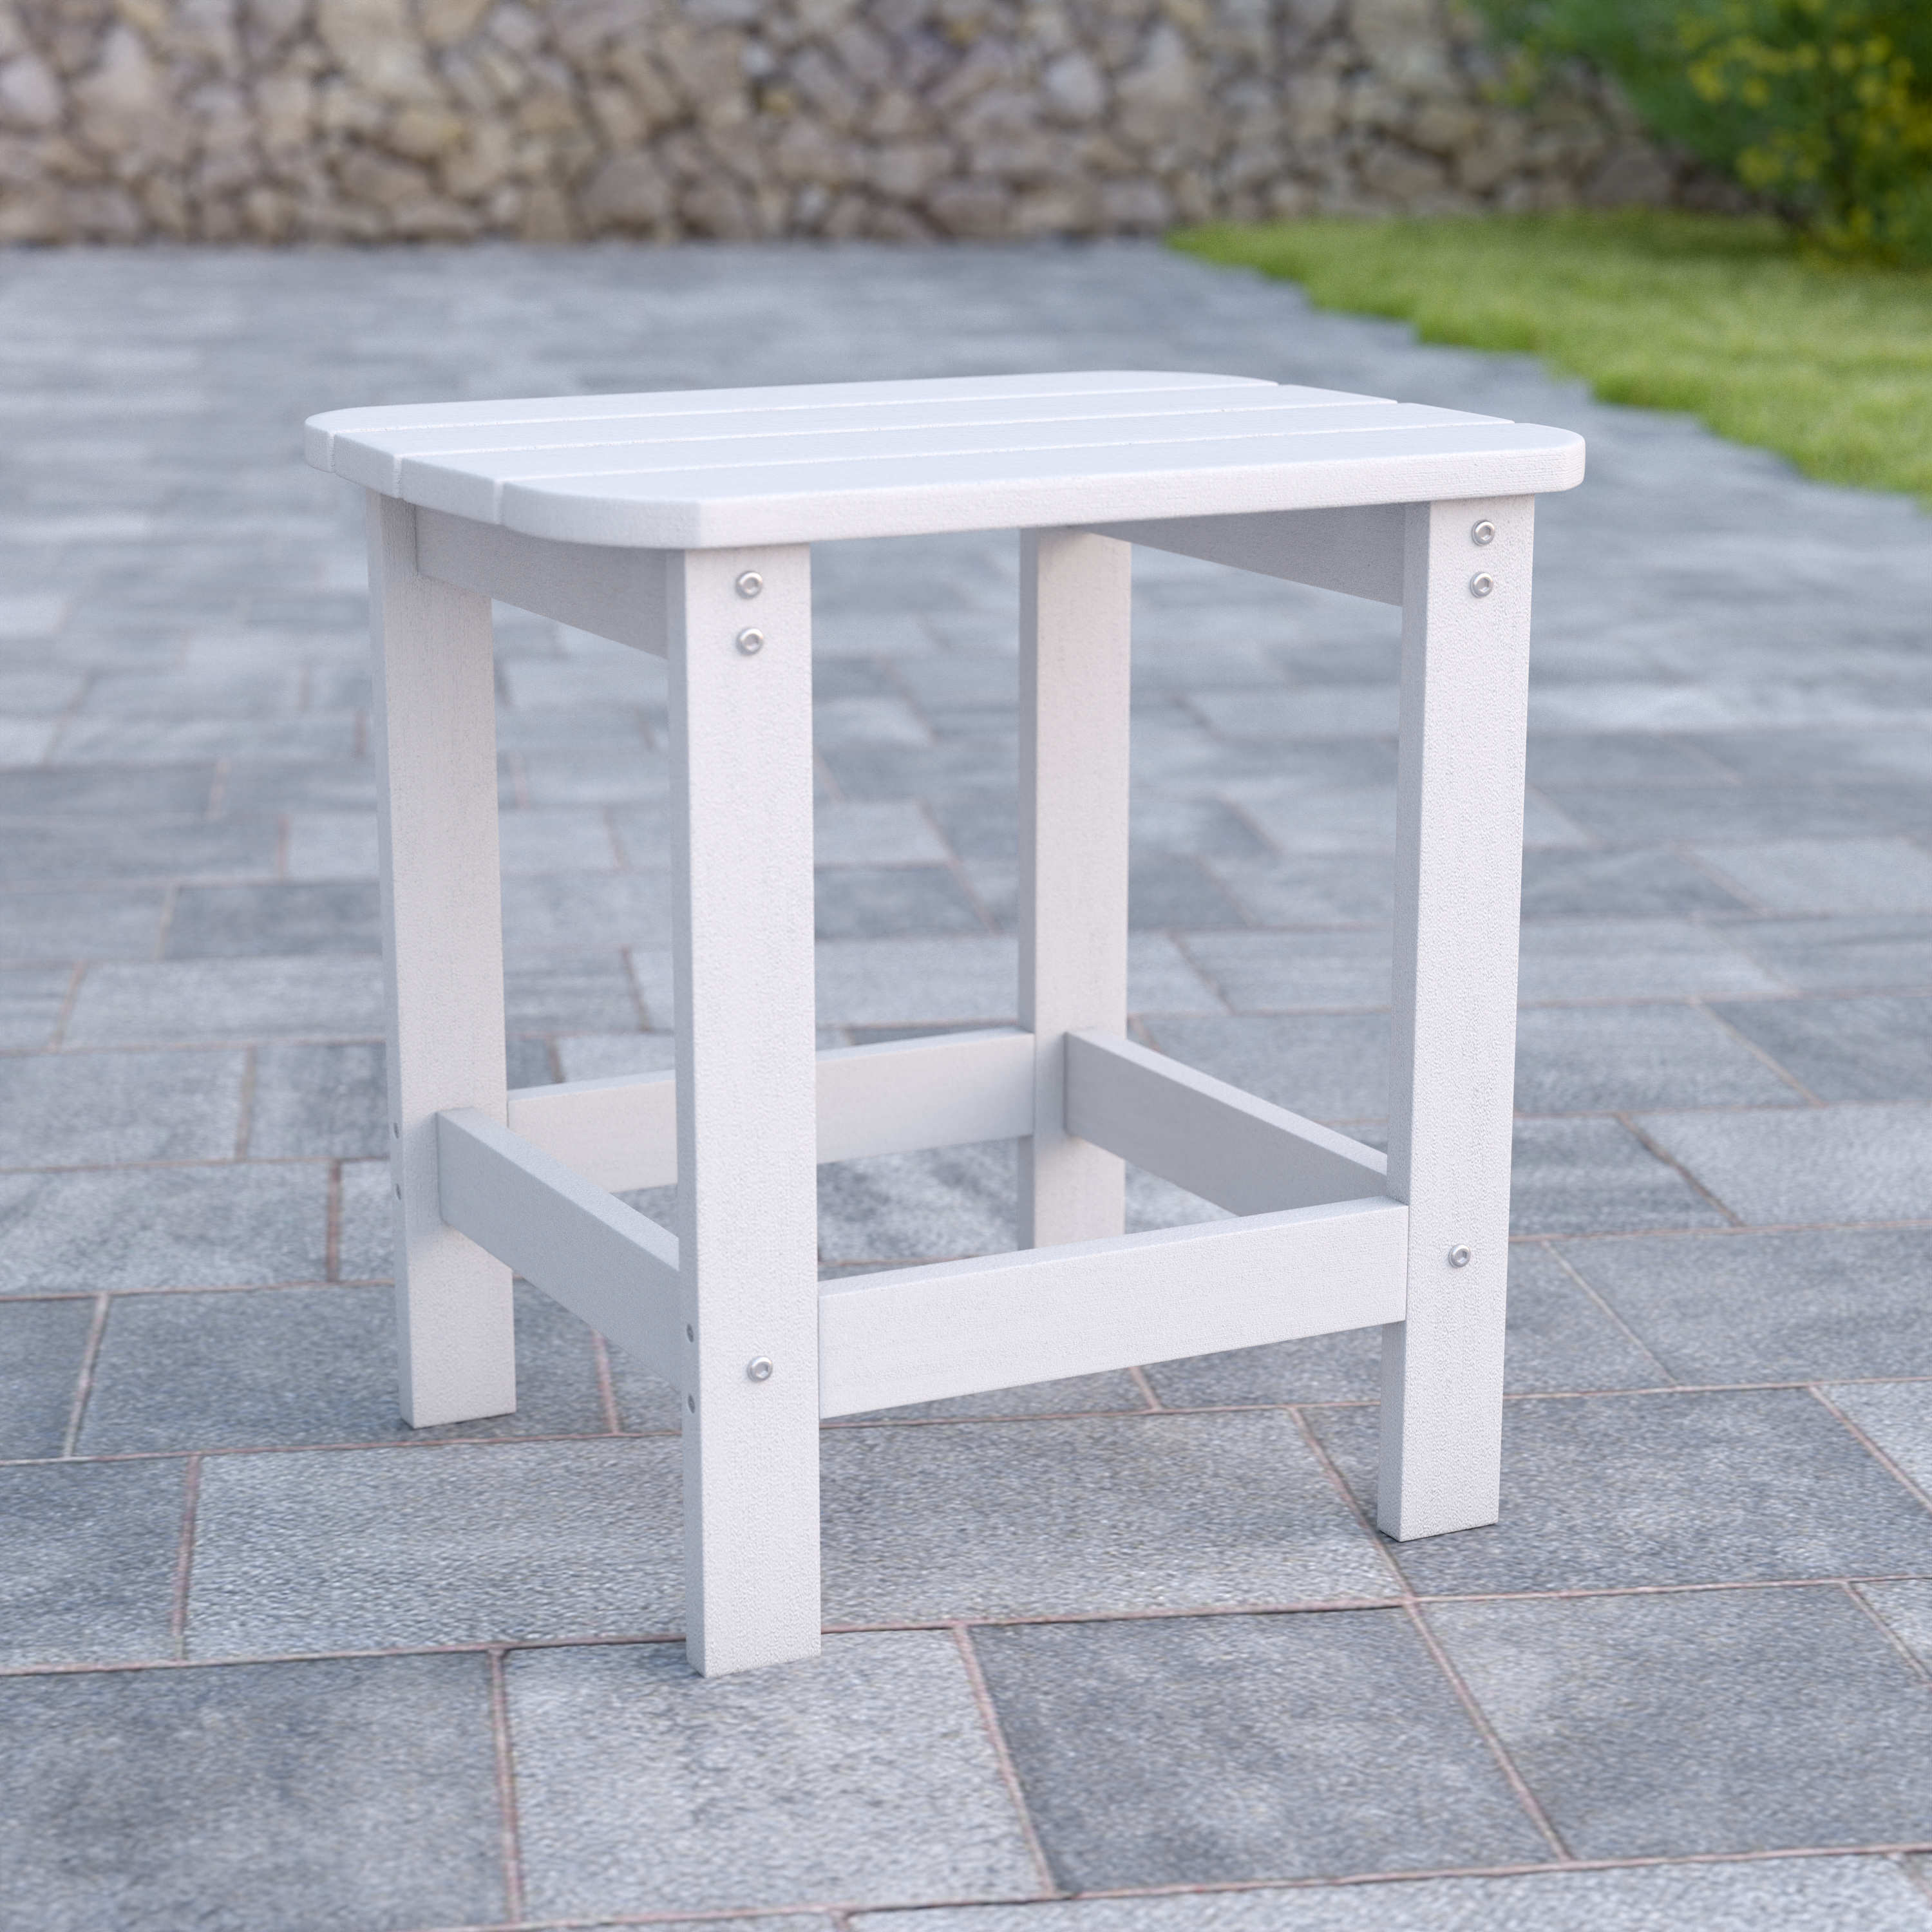 BizChair All-Weather Poly Resin Wood Commercial Grade Adirondack Side Table in White - image 1 of 9